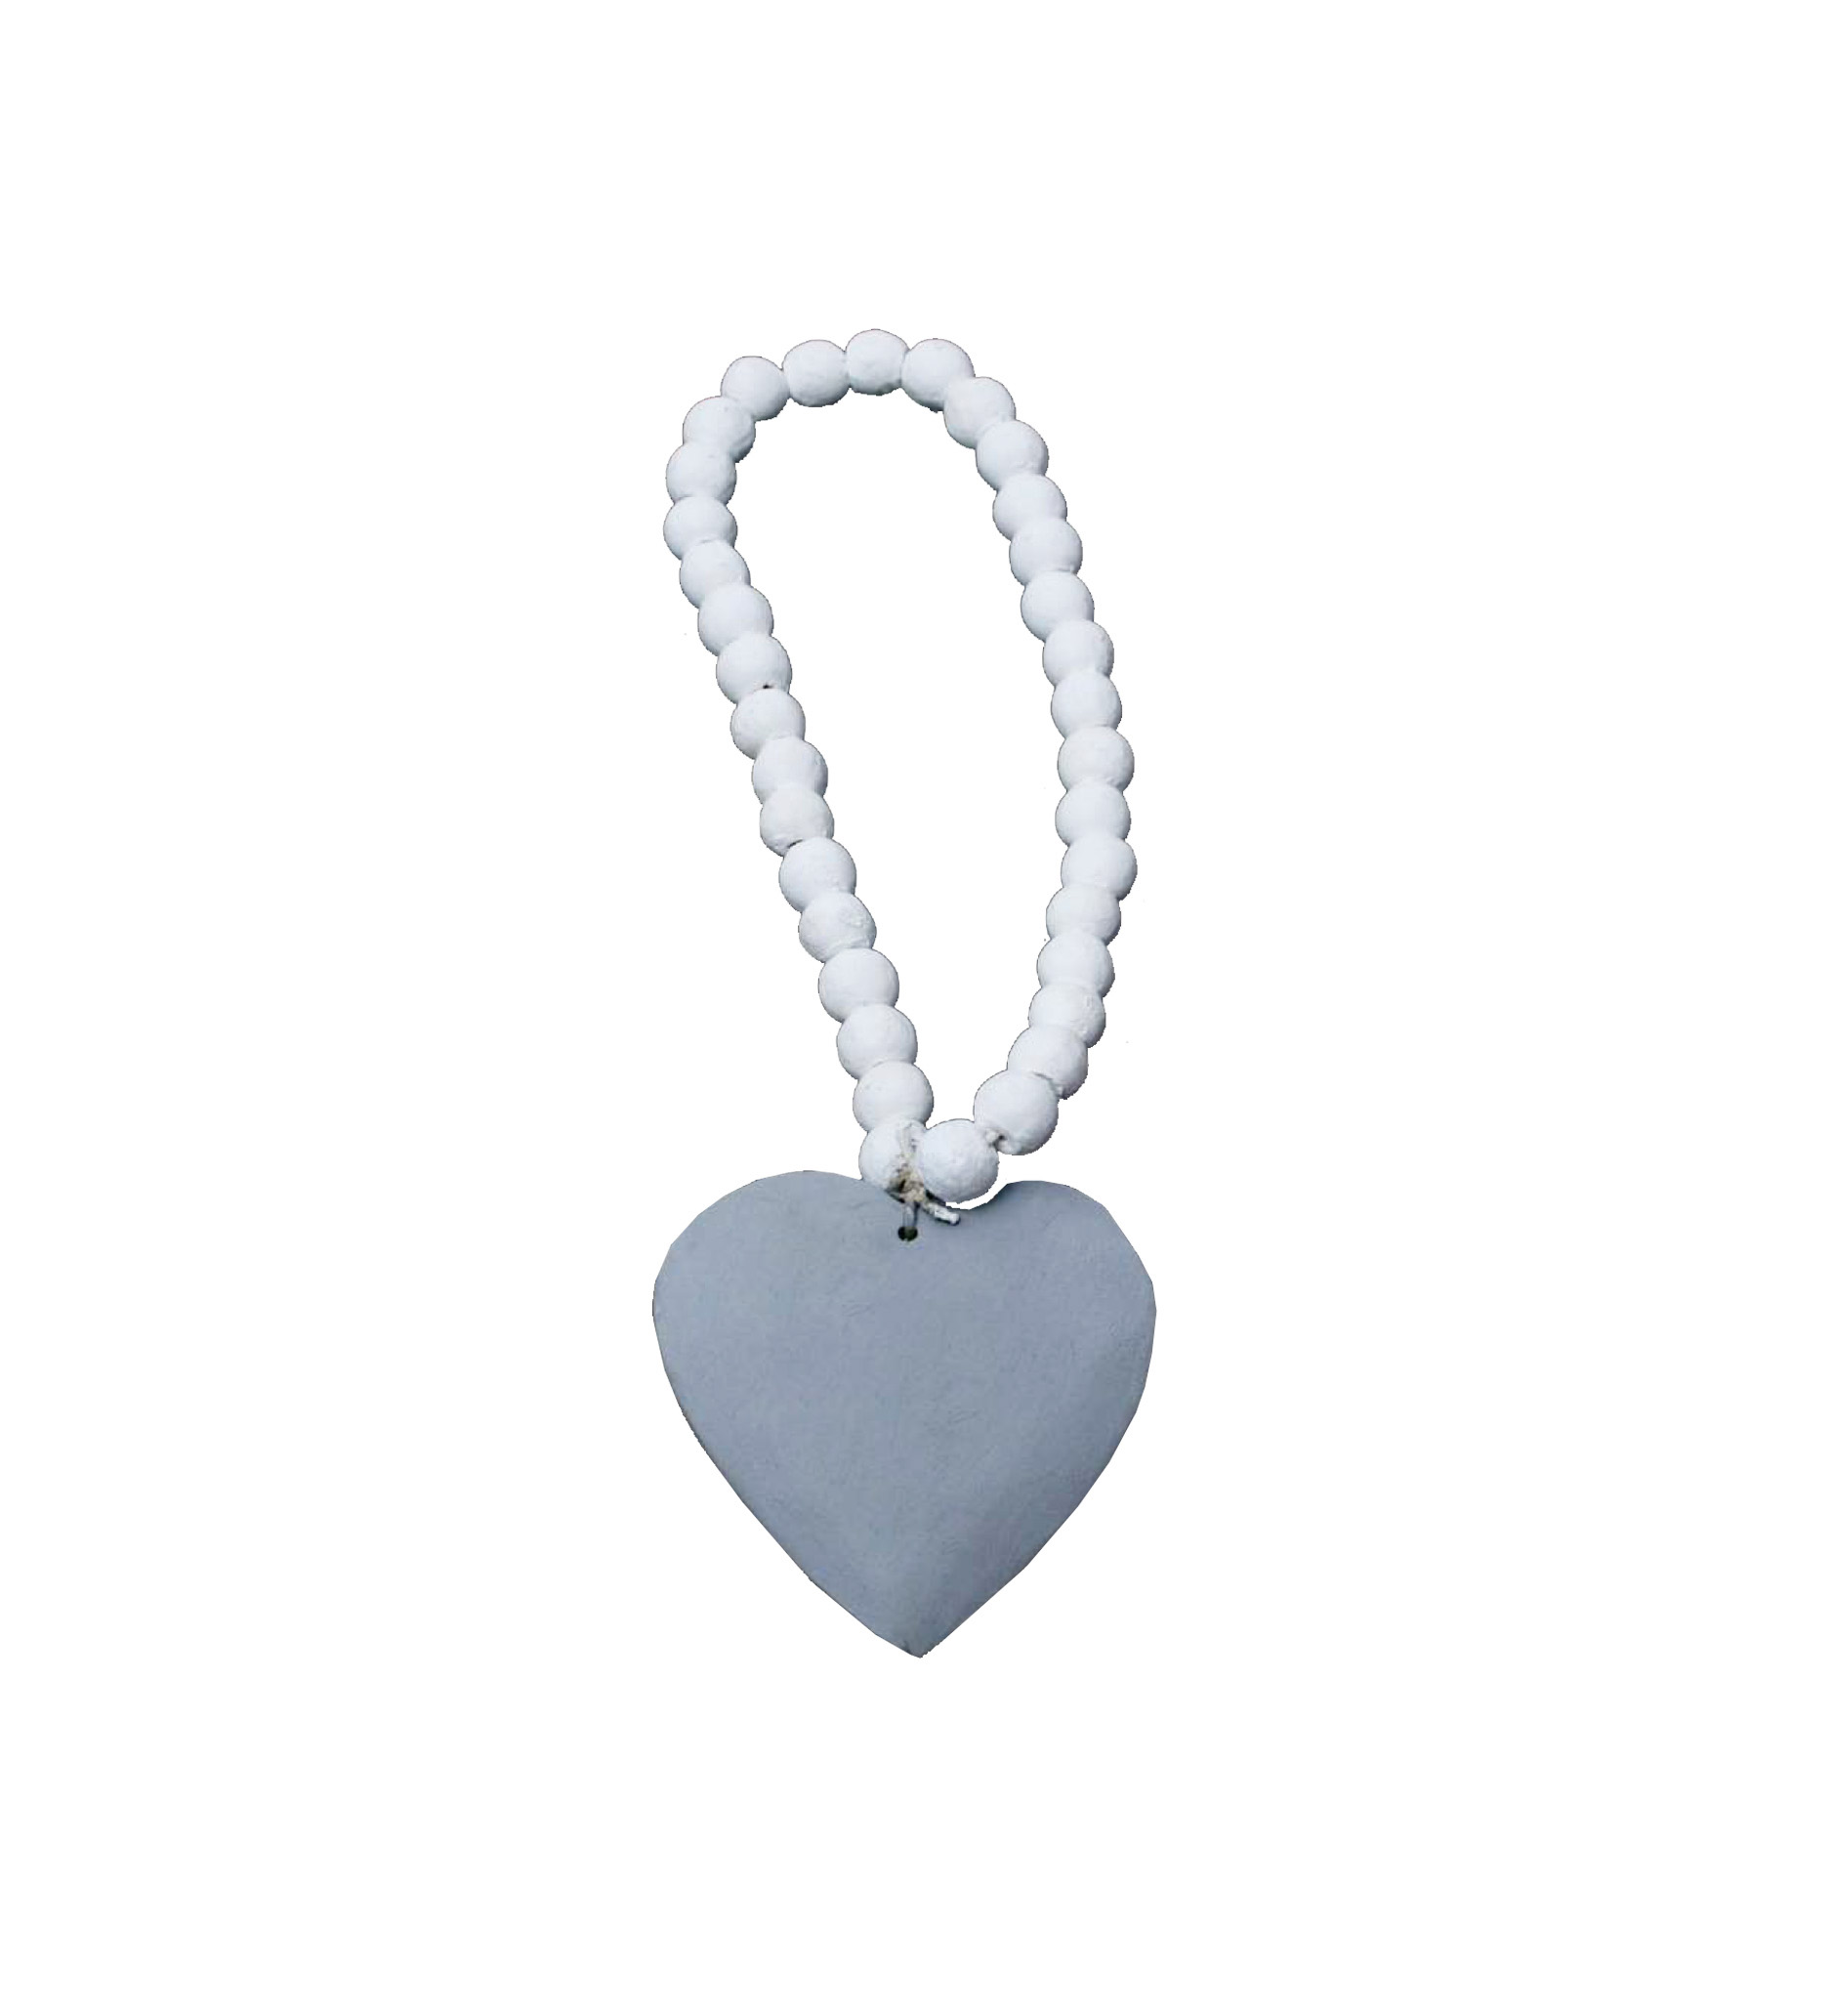 Hanging Beaded Wooden Heart White/grey Gift